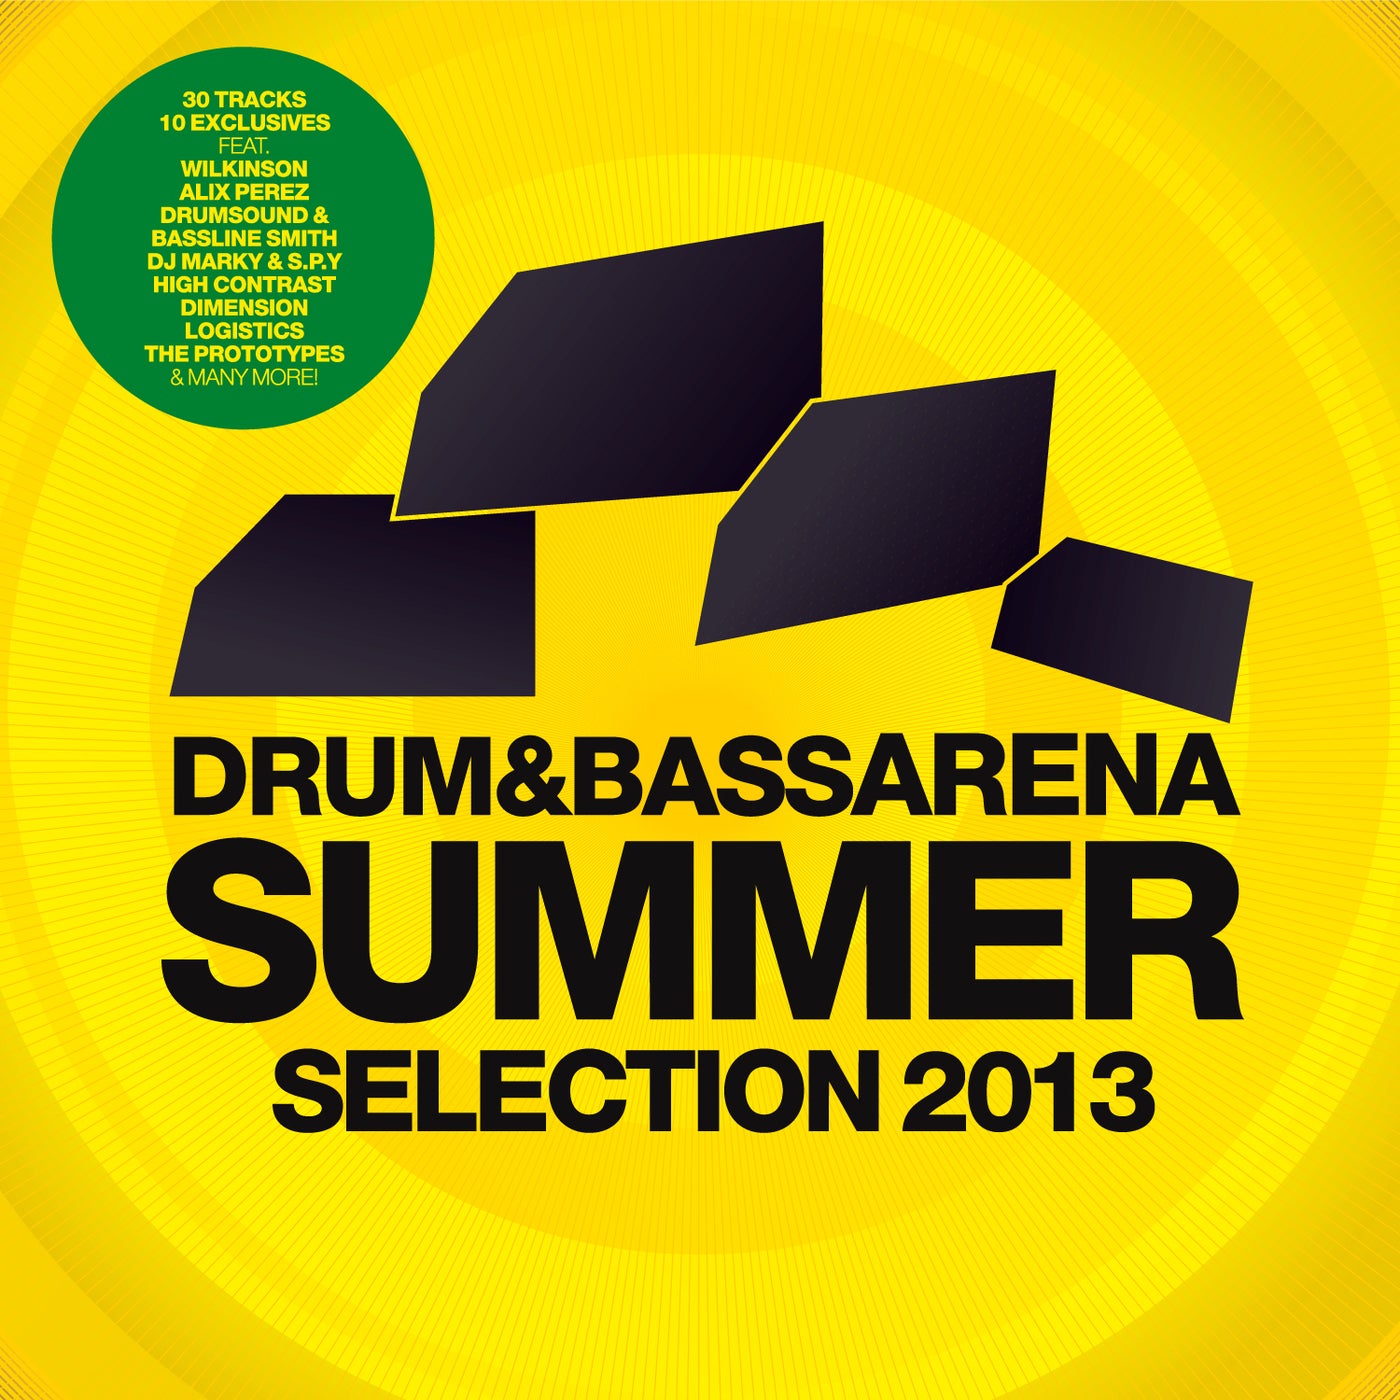 Drum & Bass Arena Summer Selection 2013